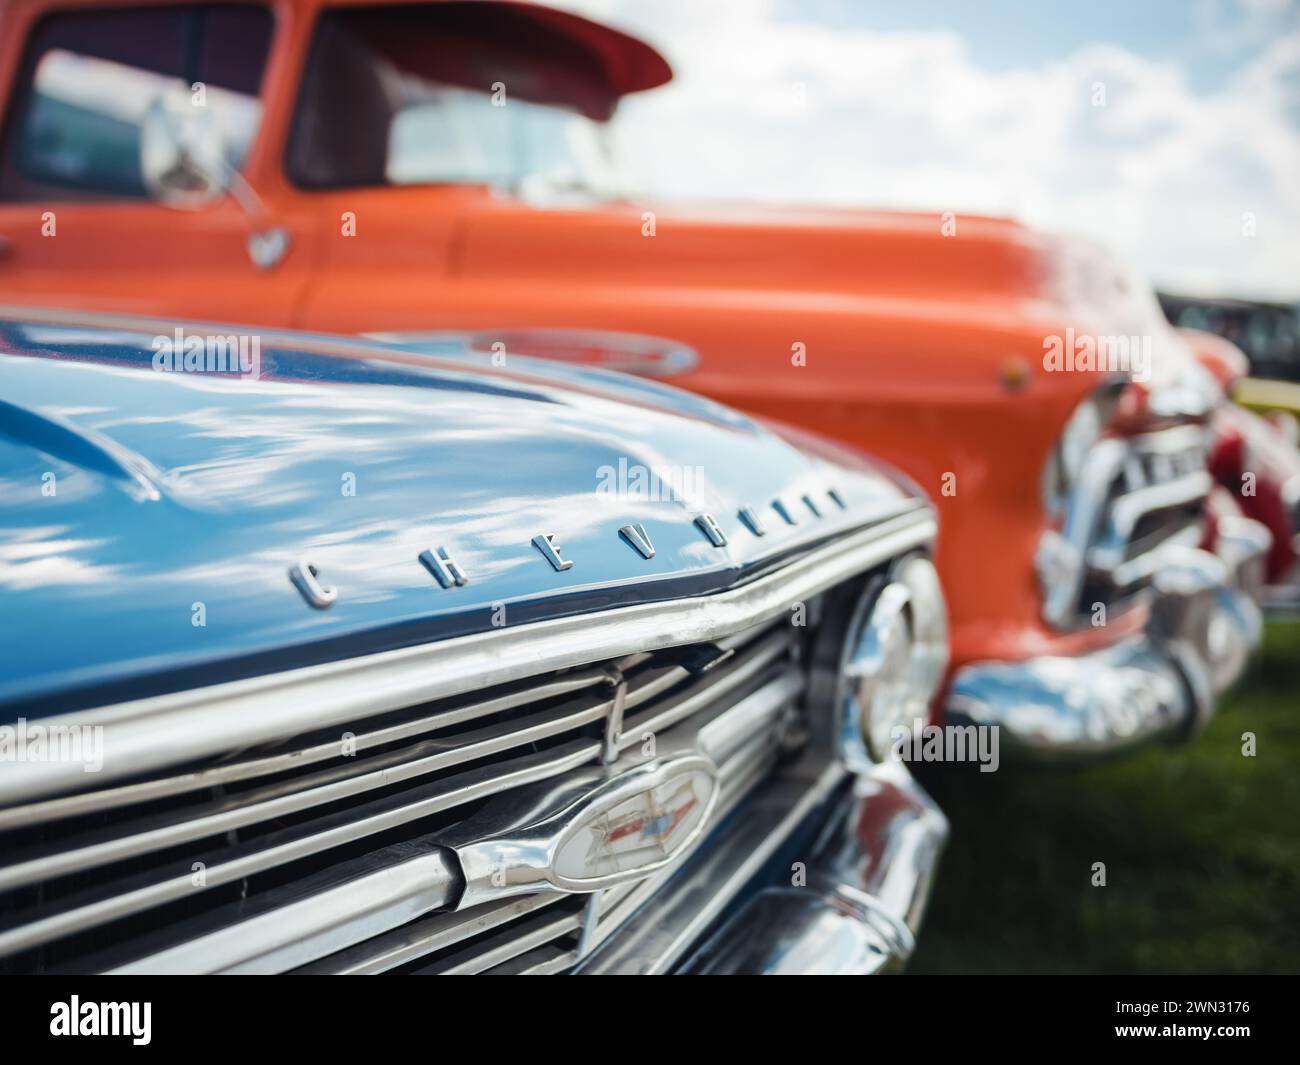 Chevrolets of the 1960 - front parts of '60 Impala and '57 Chevrolet Task Force light truck. Close-up selective focus image of Impala and truck. Stock Photo